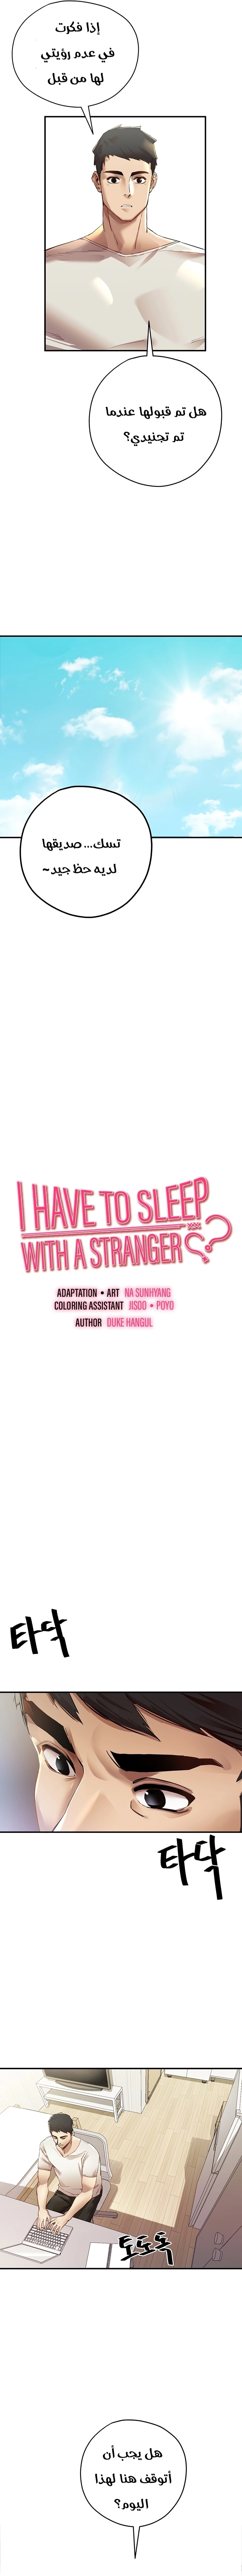 I Have To Sleep With A Stranger? - 1 - 6532a5d8977c5.webp